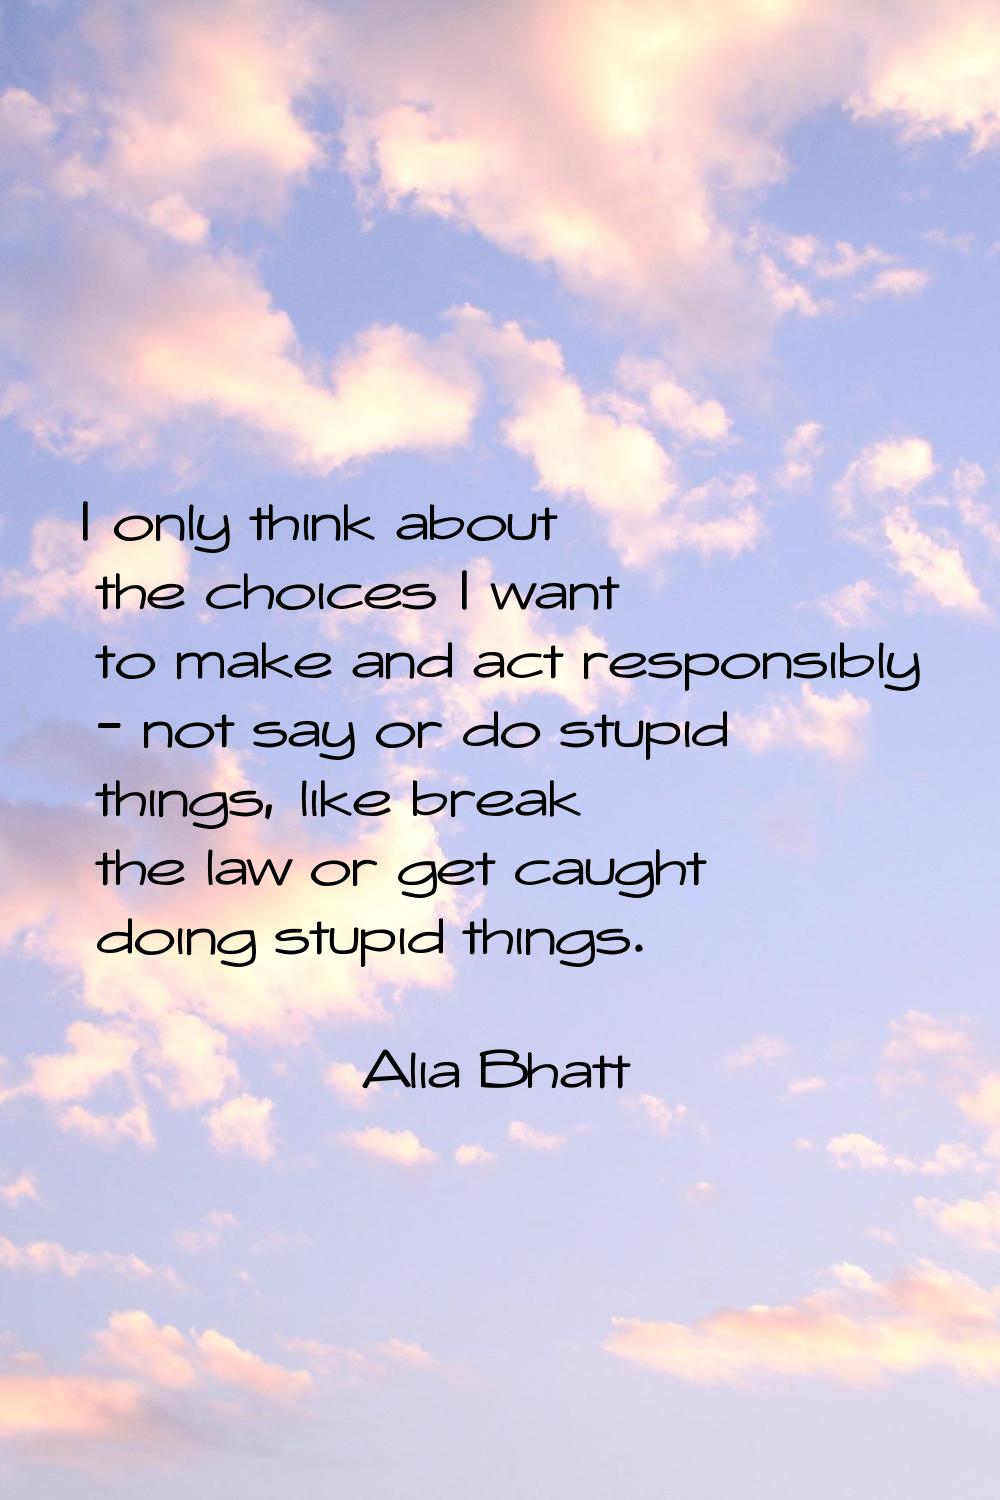 I only think about the choices I want to make and act responsibly - not say or do stupid things, li